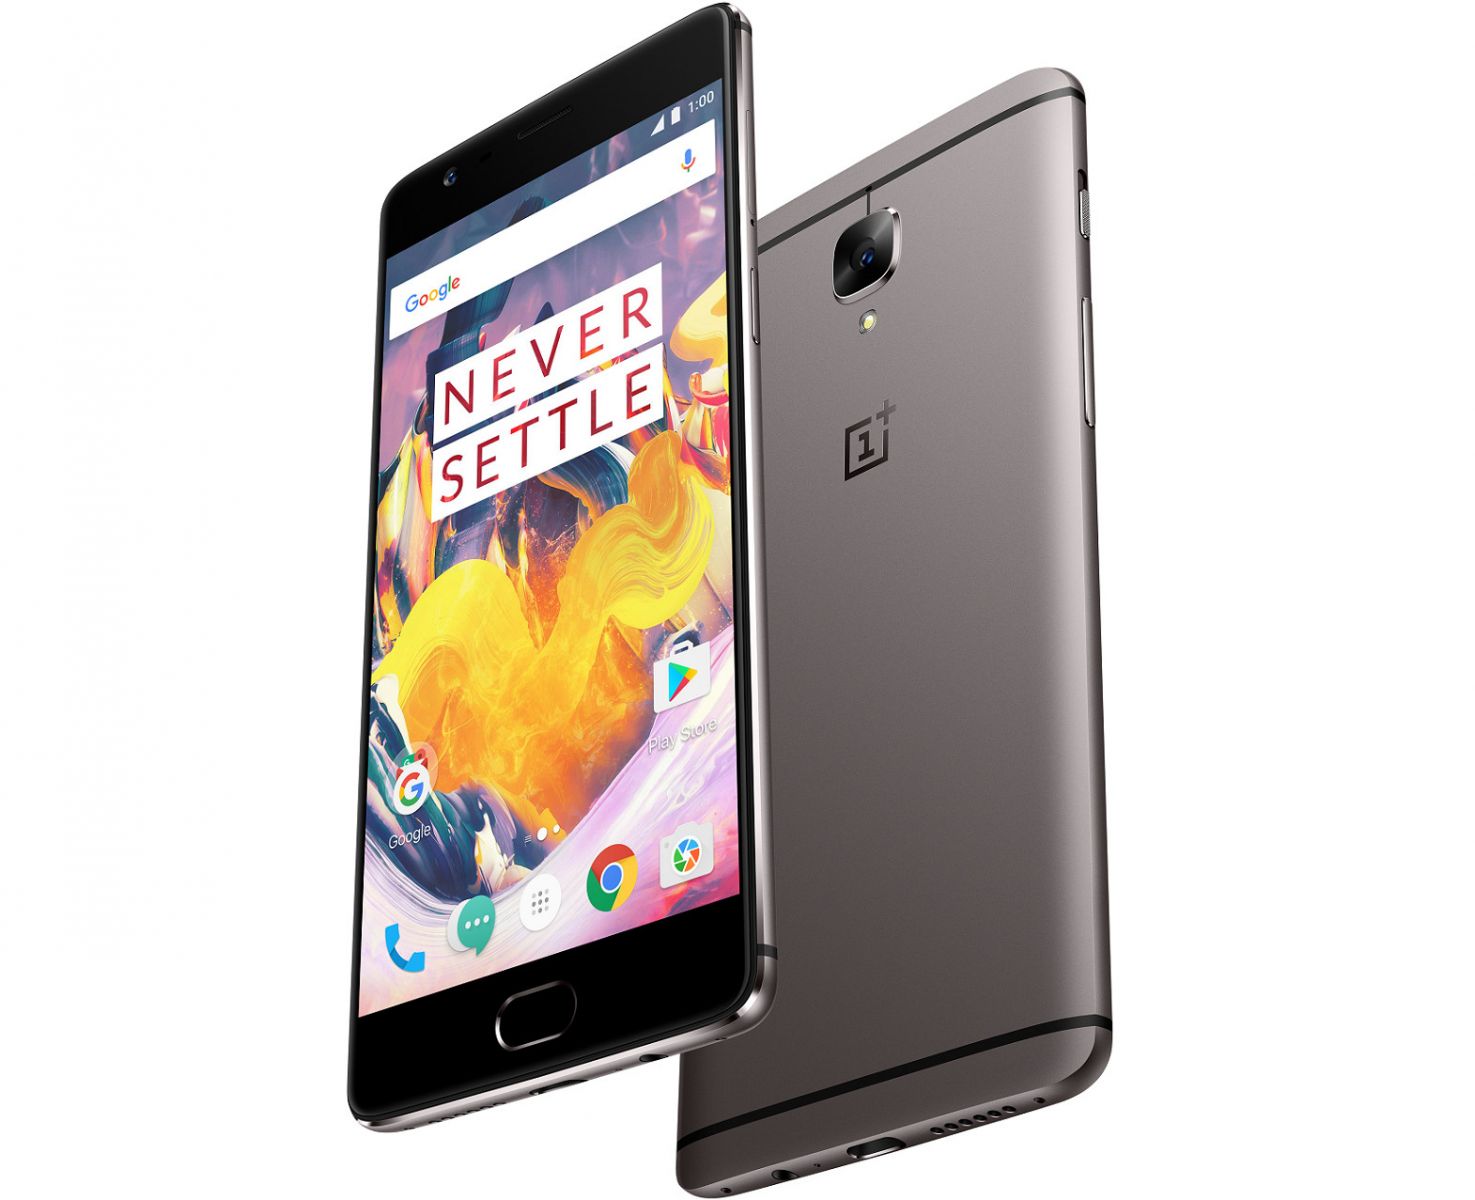 OnePlus refreshes flagship model with 3T